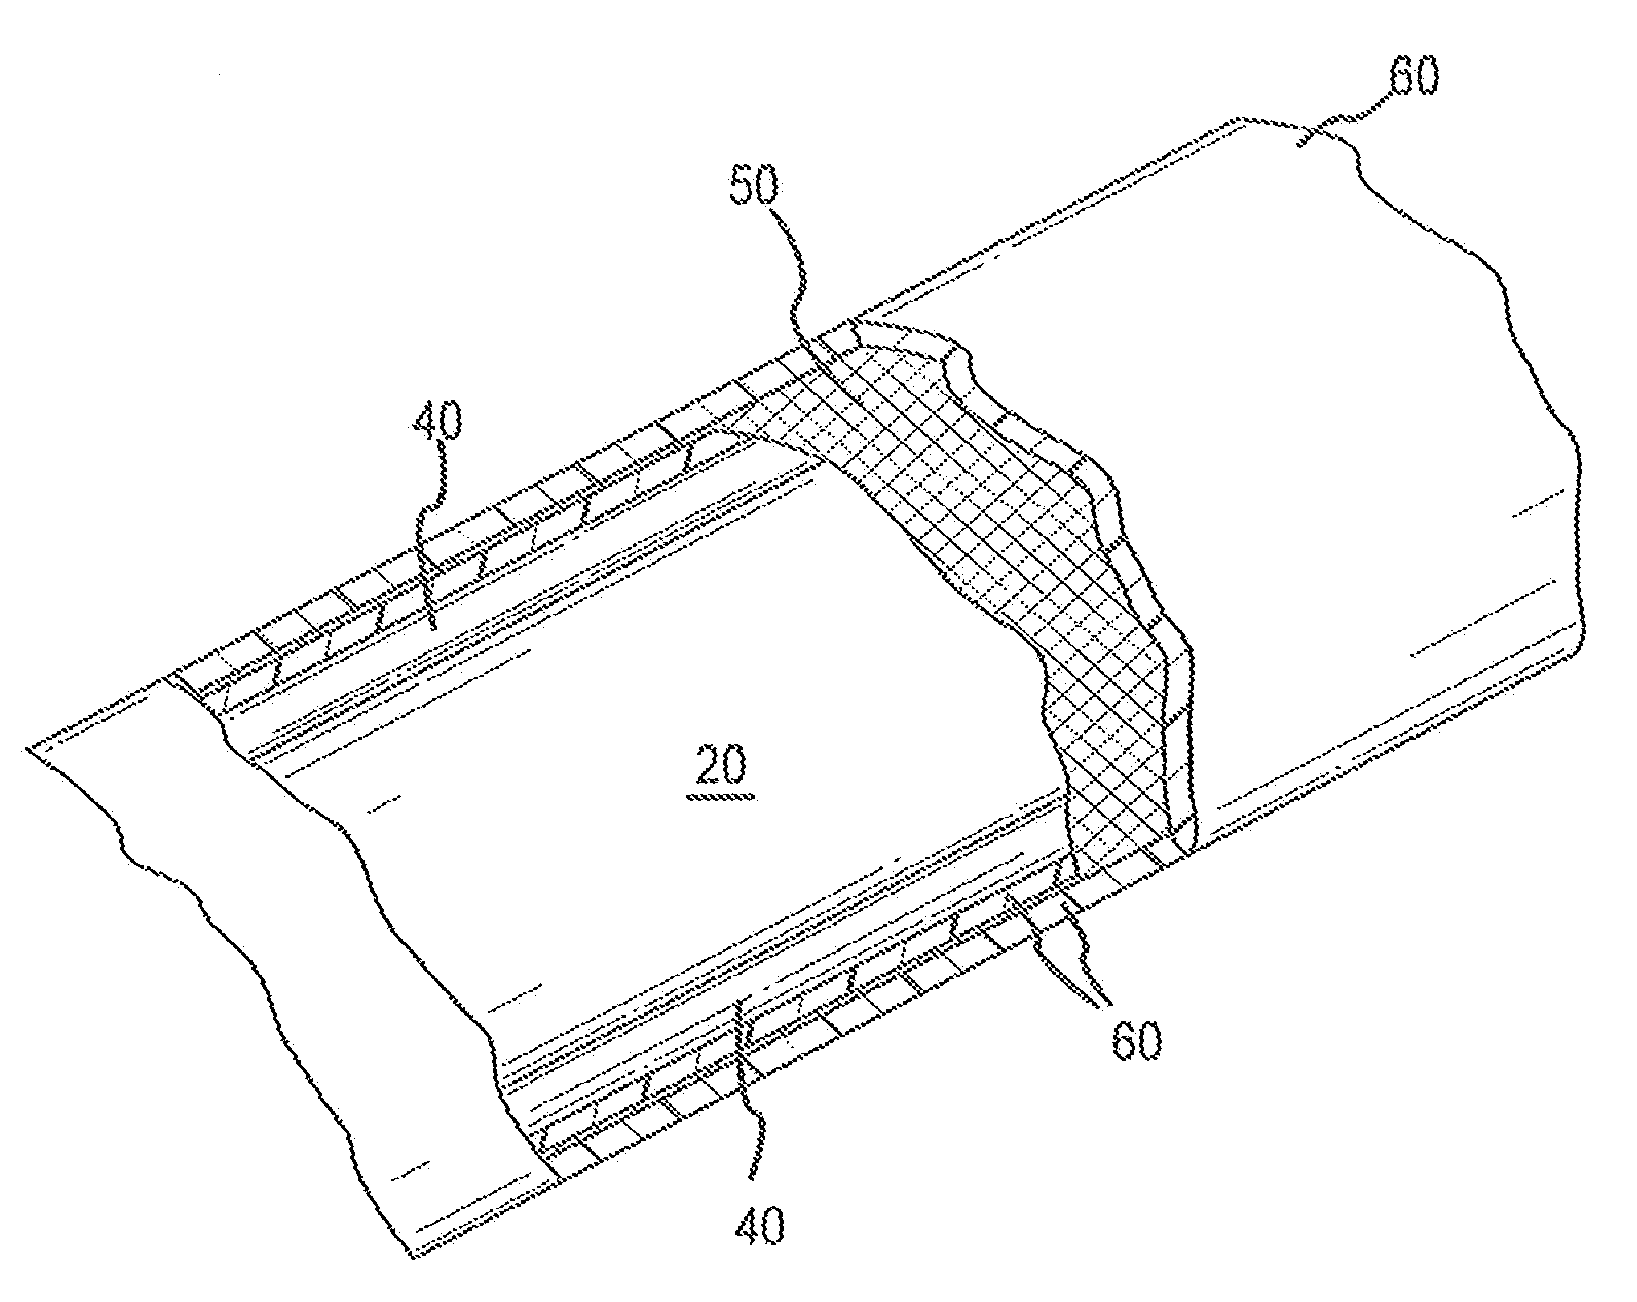 Steerable Catheter Using Flat Pull Wires and Having Torque Transfer Layer Made of Braided Flat Wires